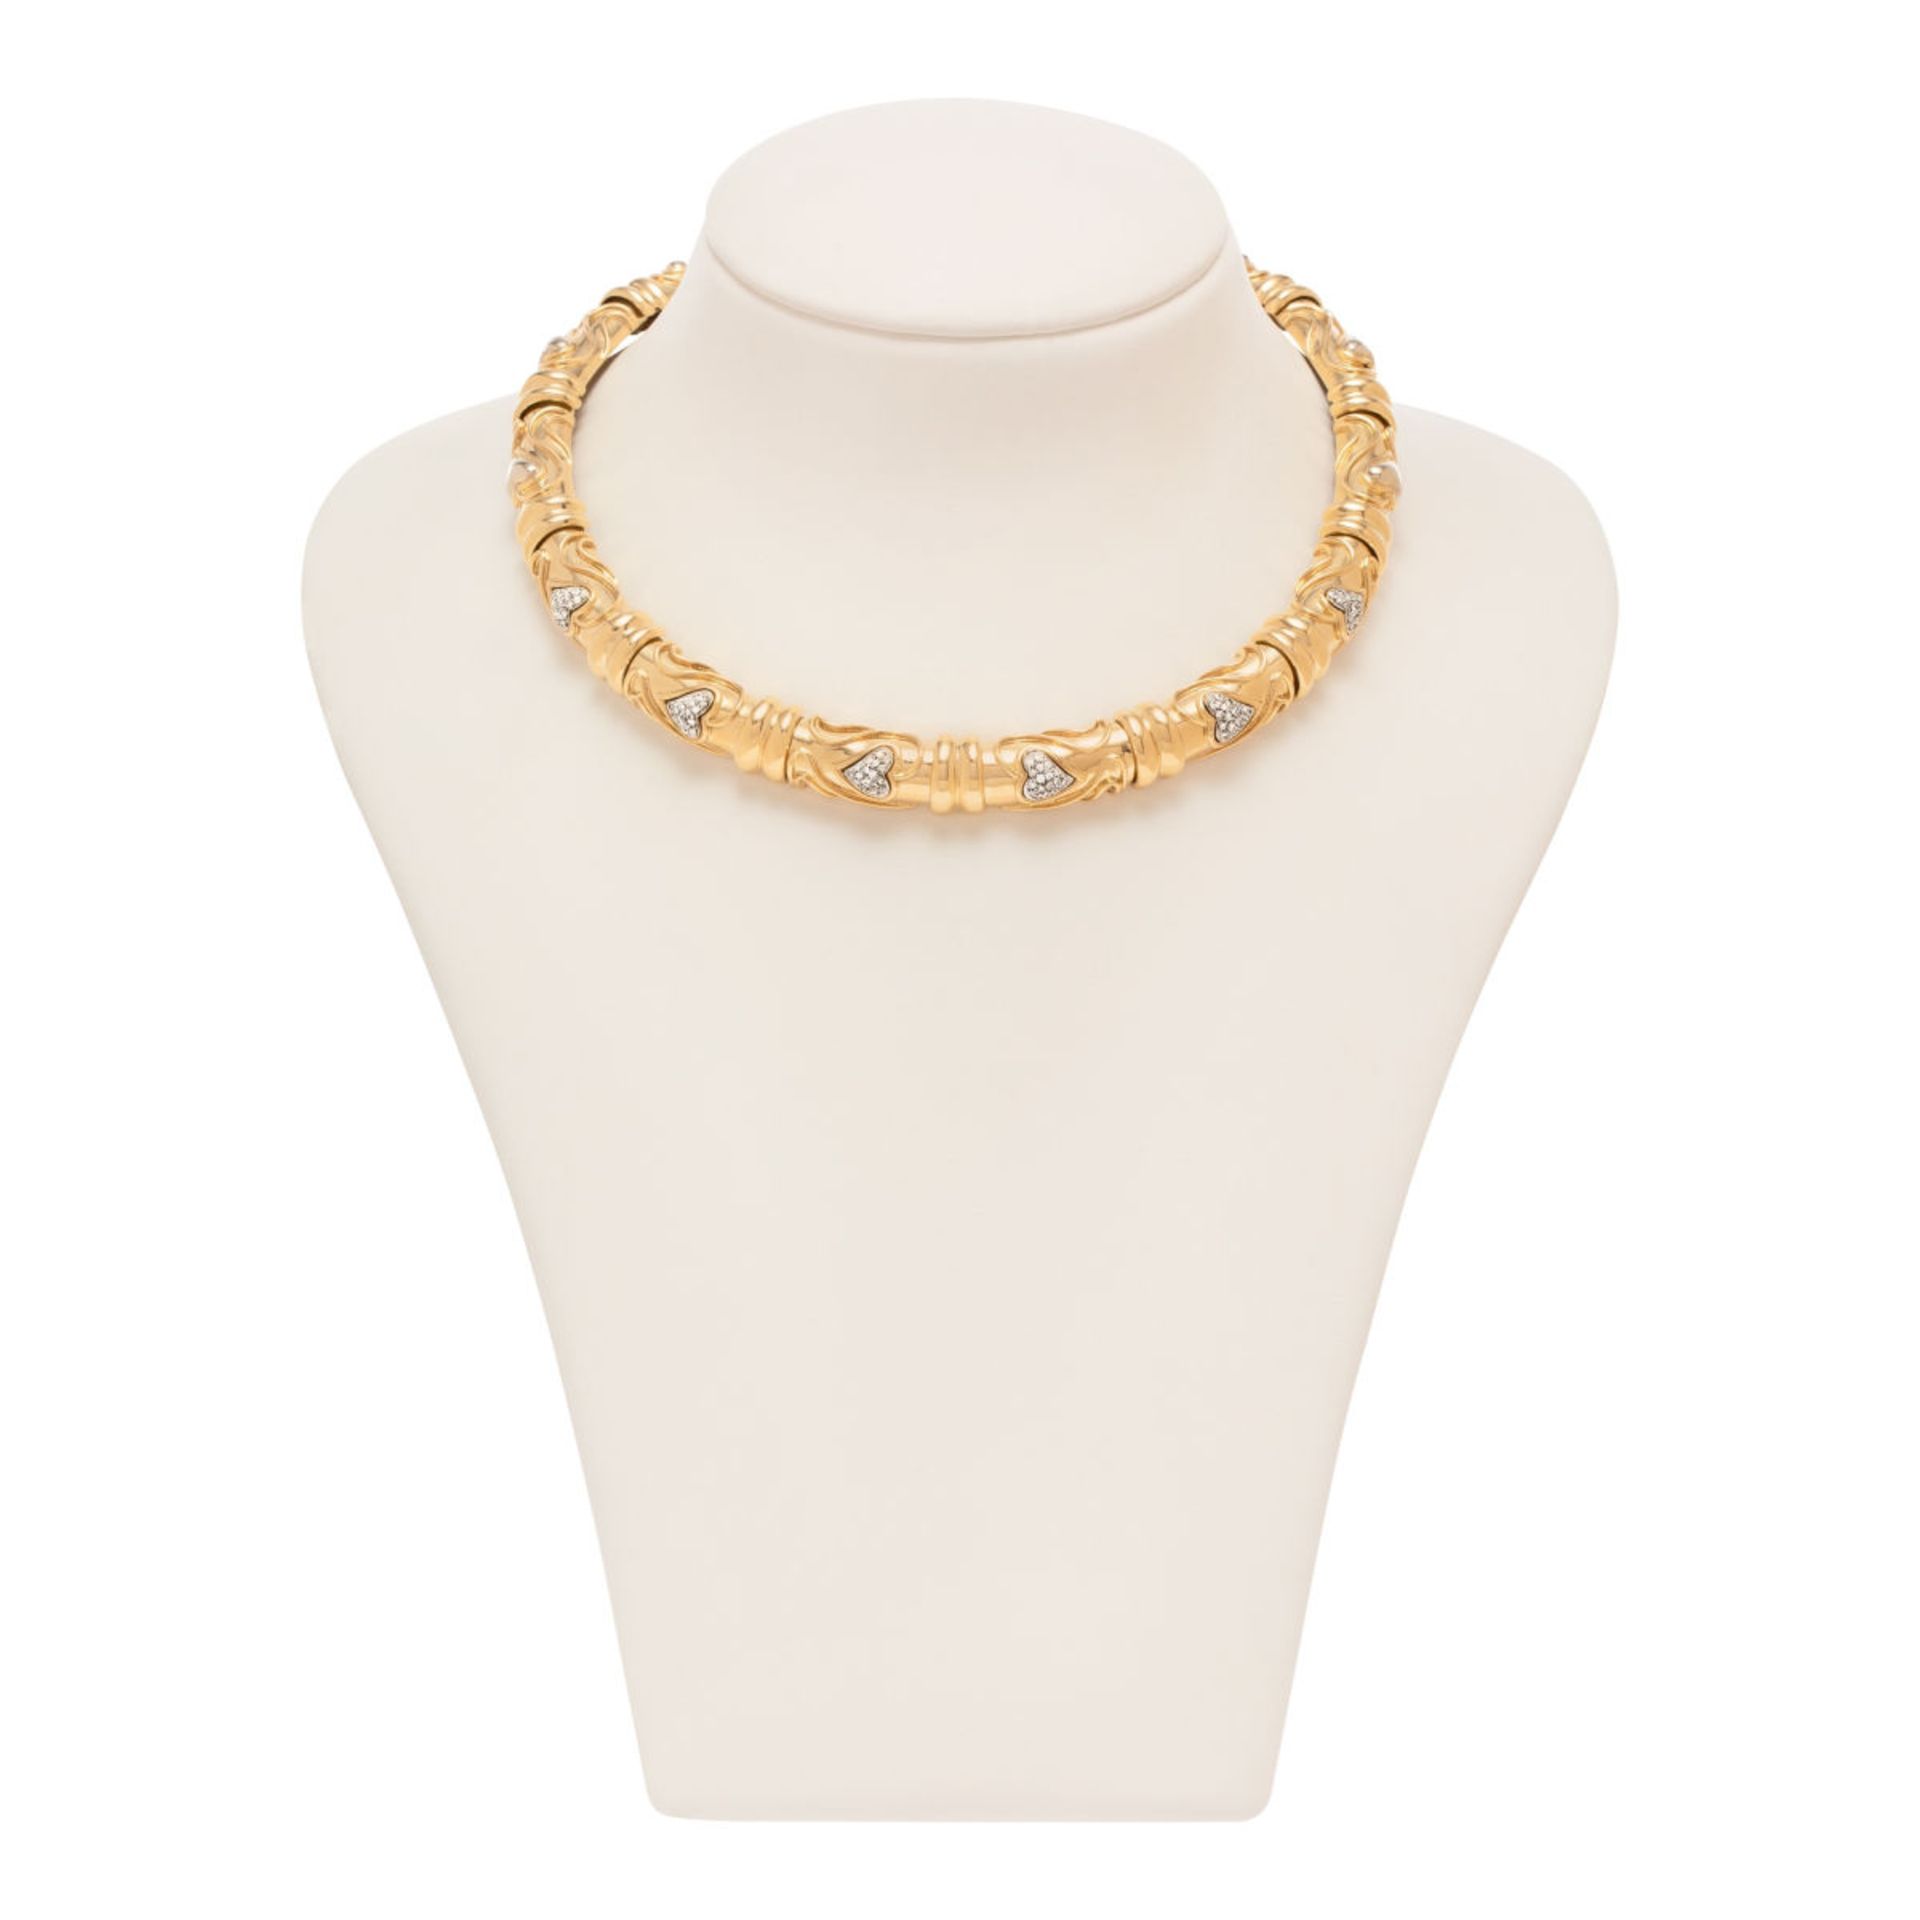 Wempe gold necklace with diamond hearts